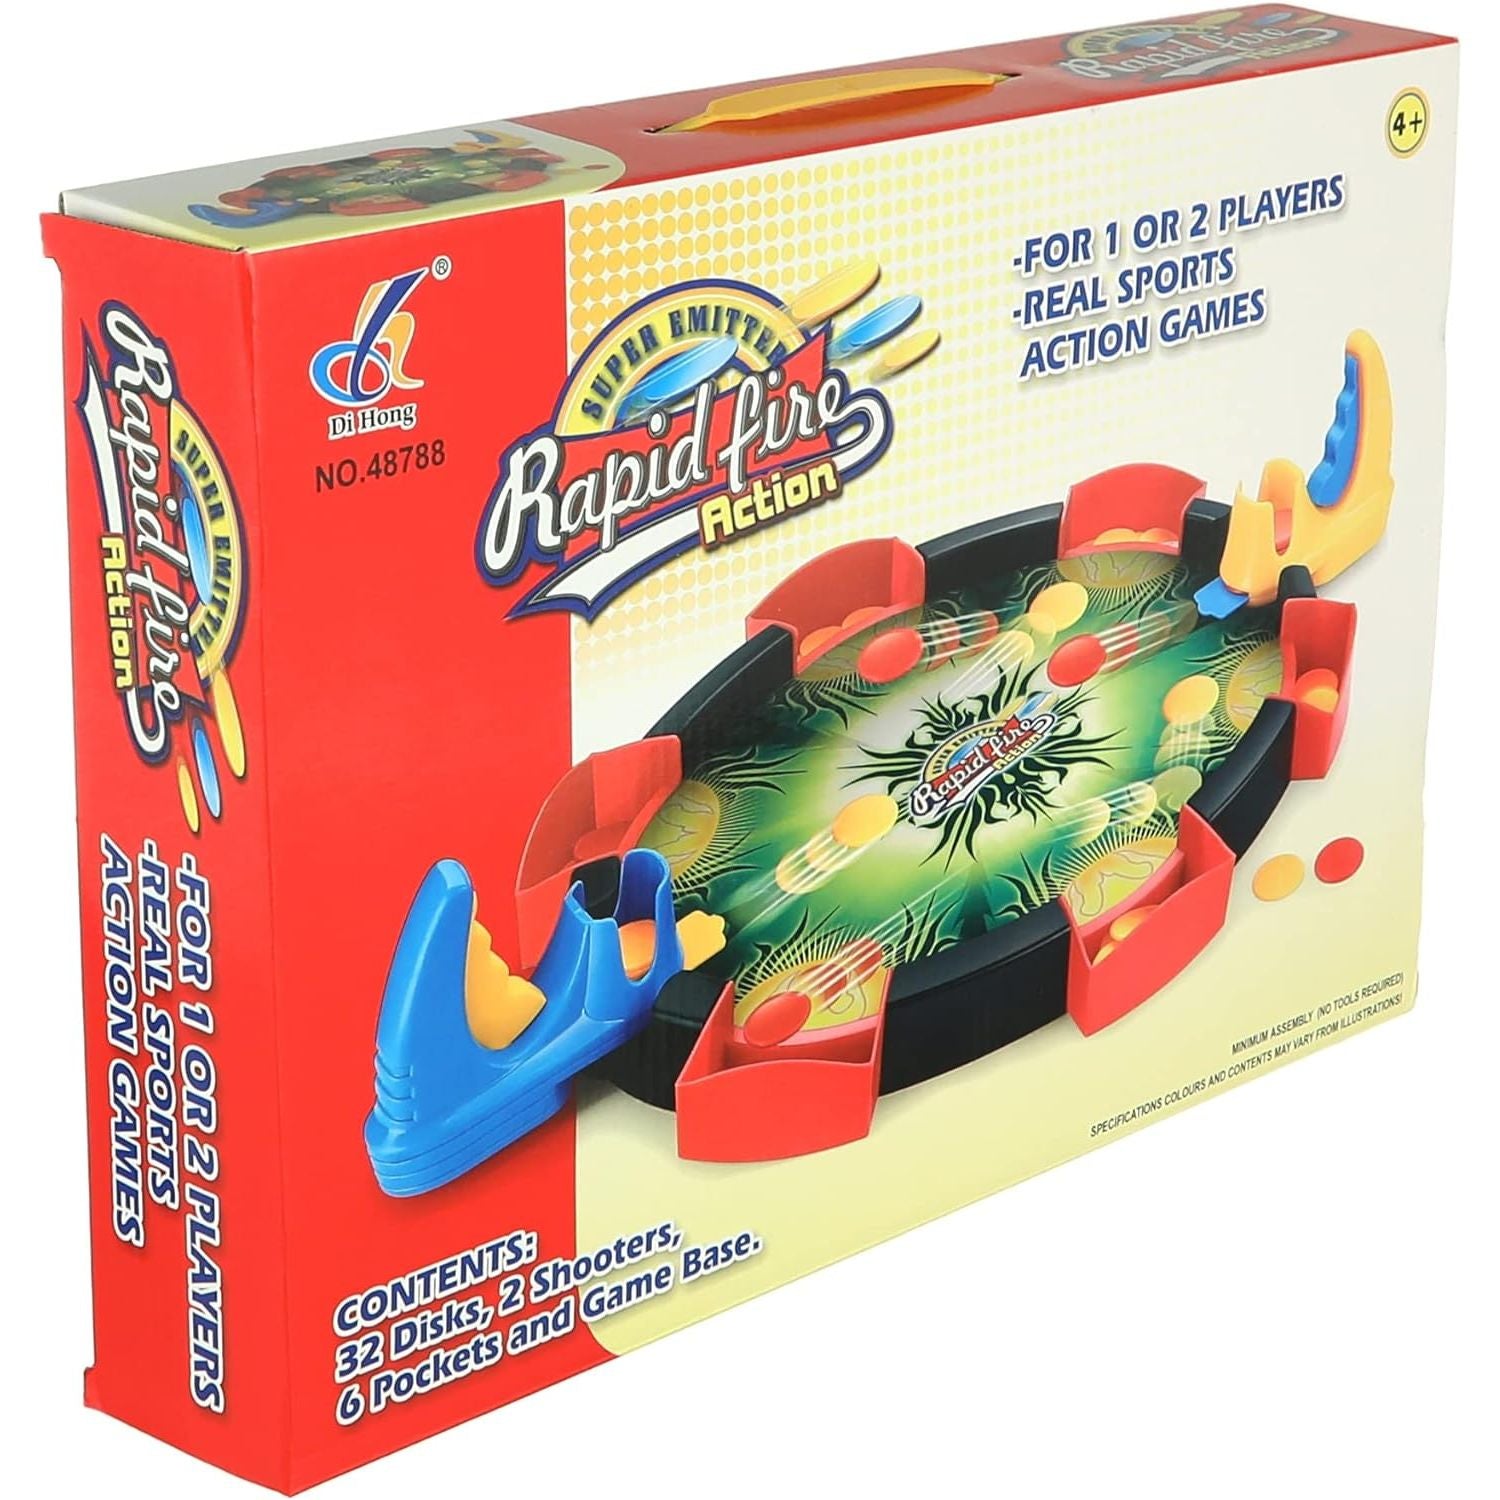 Di Hong Rapid Fire Action Game for Kids 48788  - Multi Color